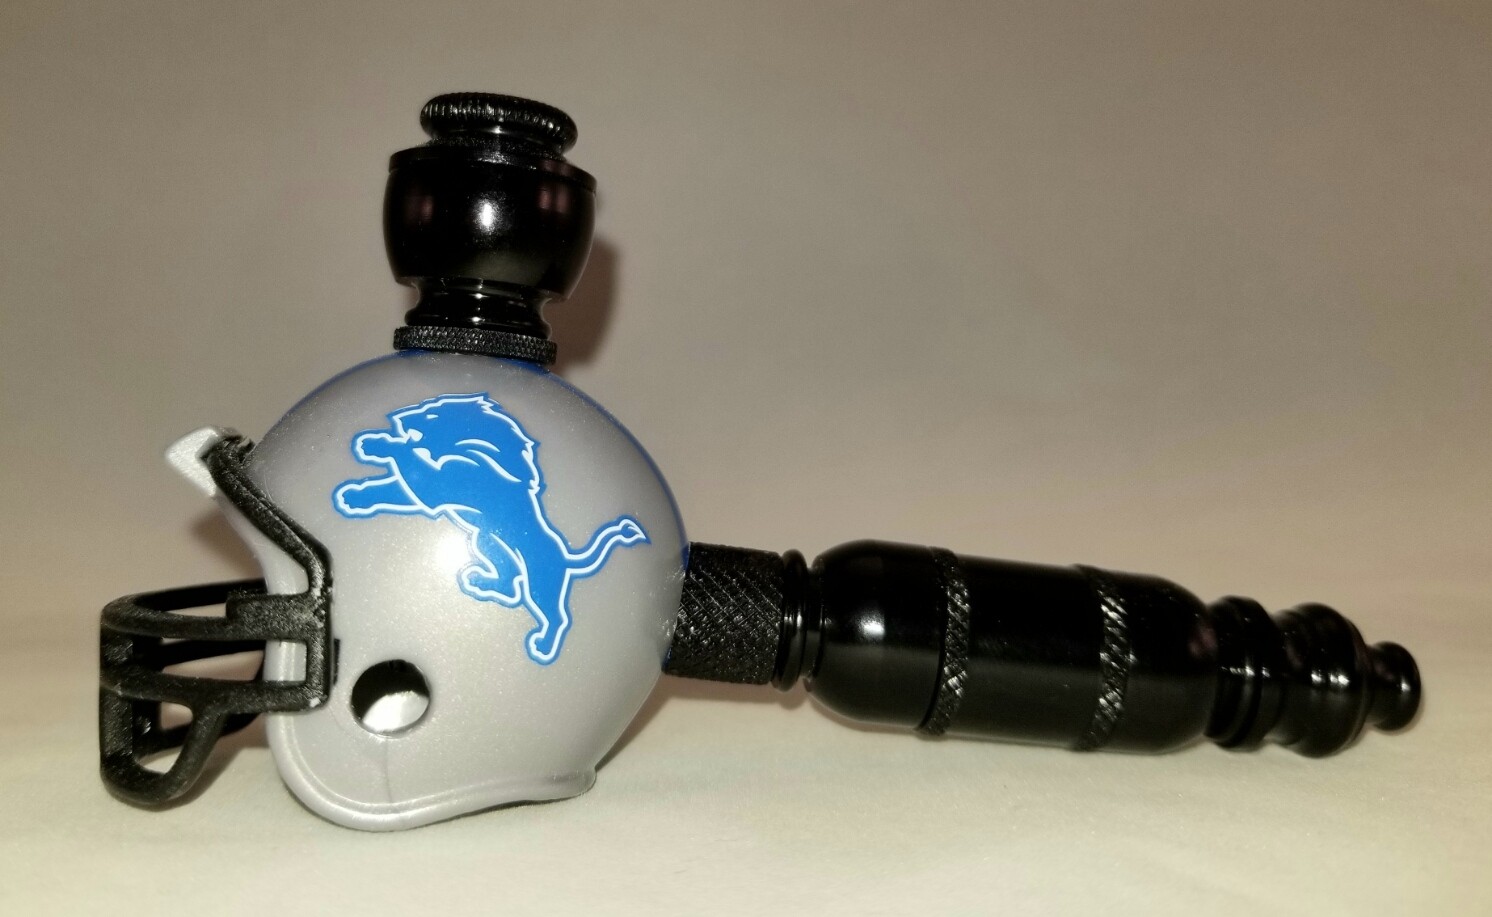 DETROIT LIONS "BAD ASS" NFL FOOTBALL HELMET SMOKING PIPE Small Straight/Black Anodized